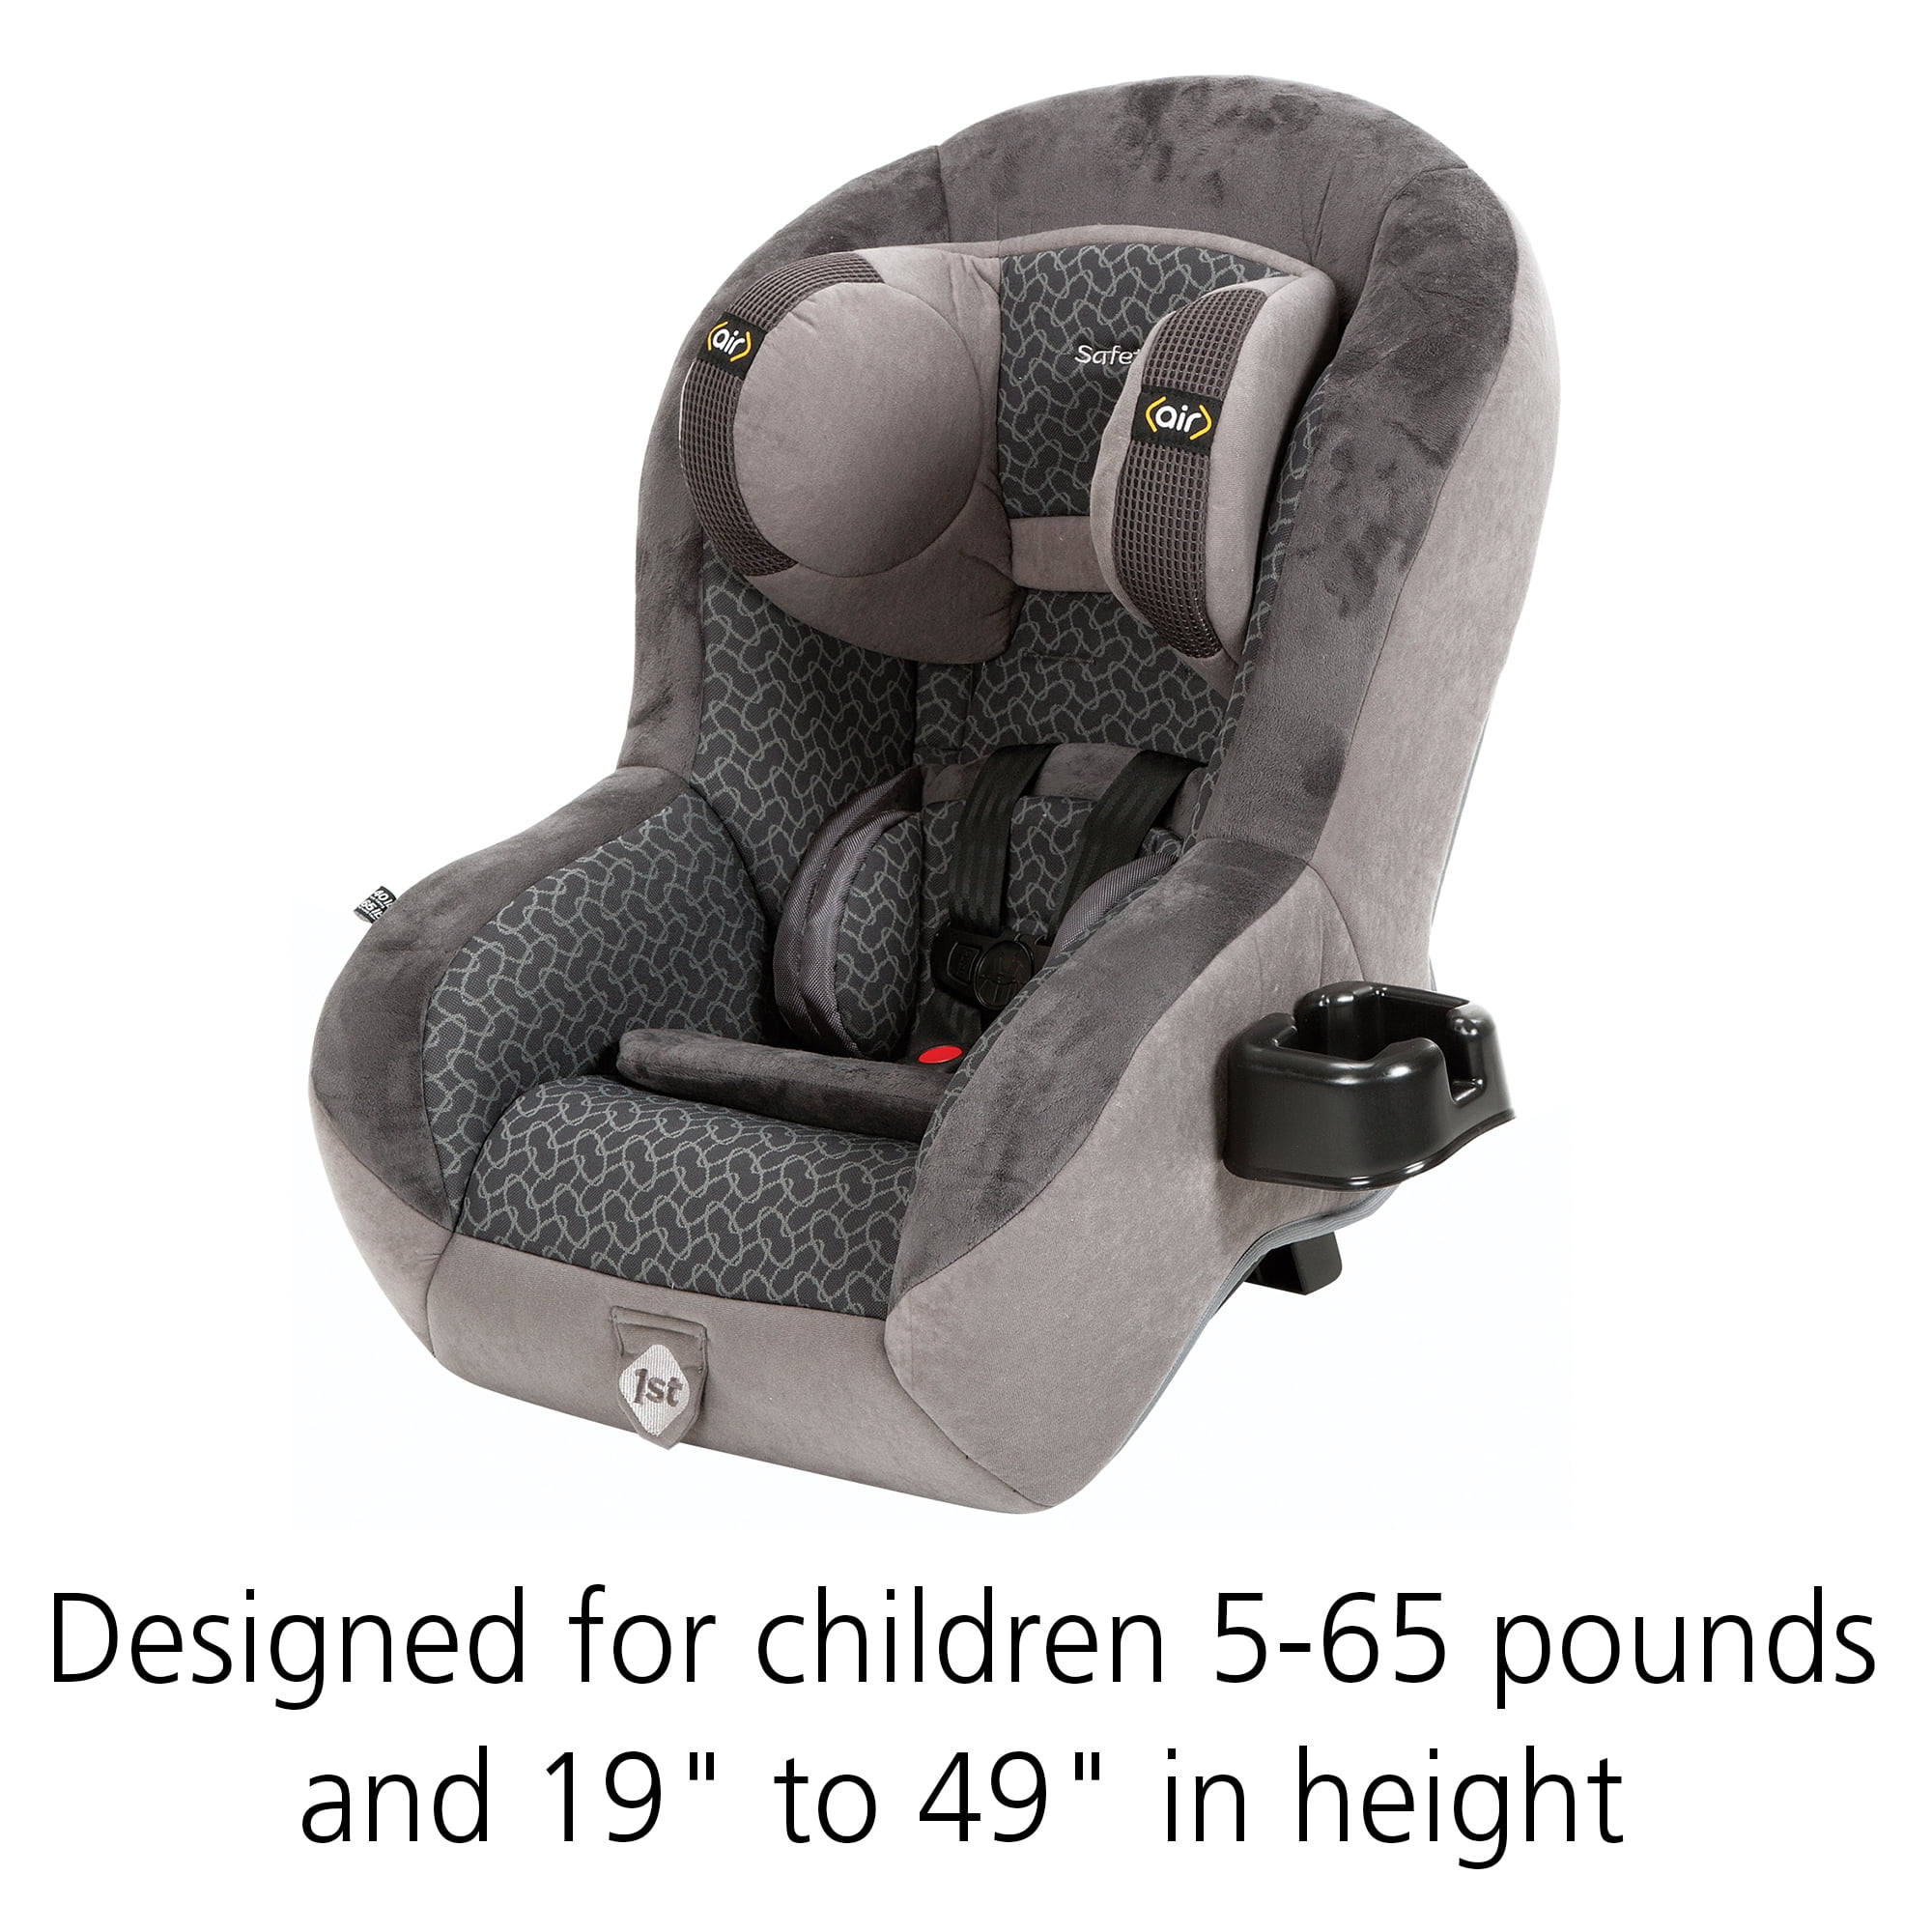 Safety 1st Chart 65 Convertible Car Seat